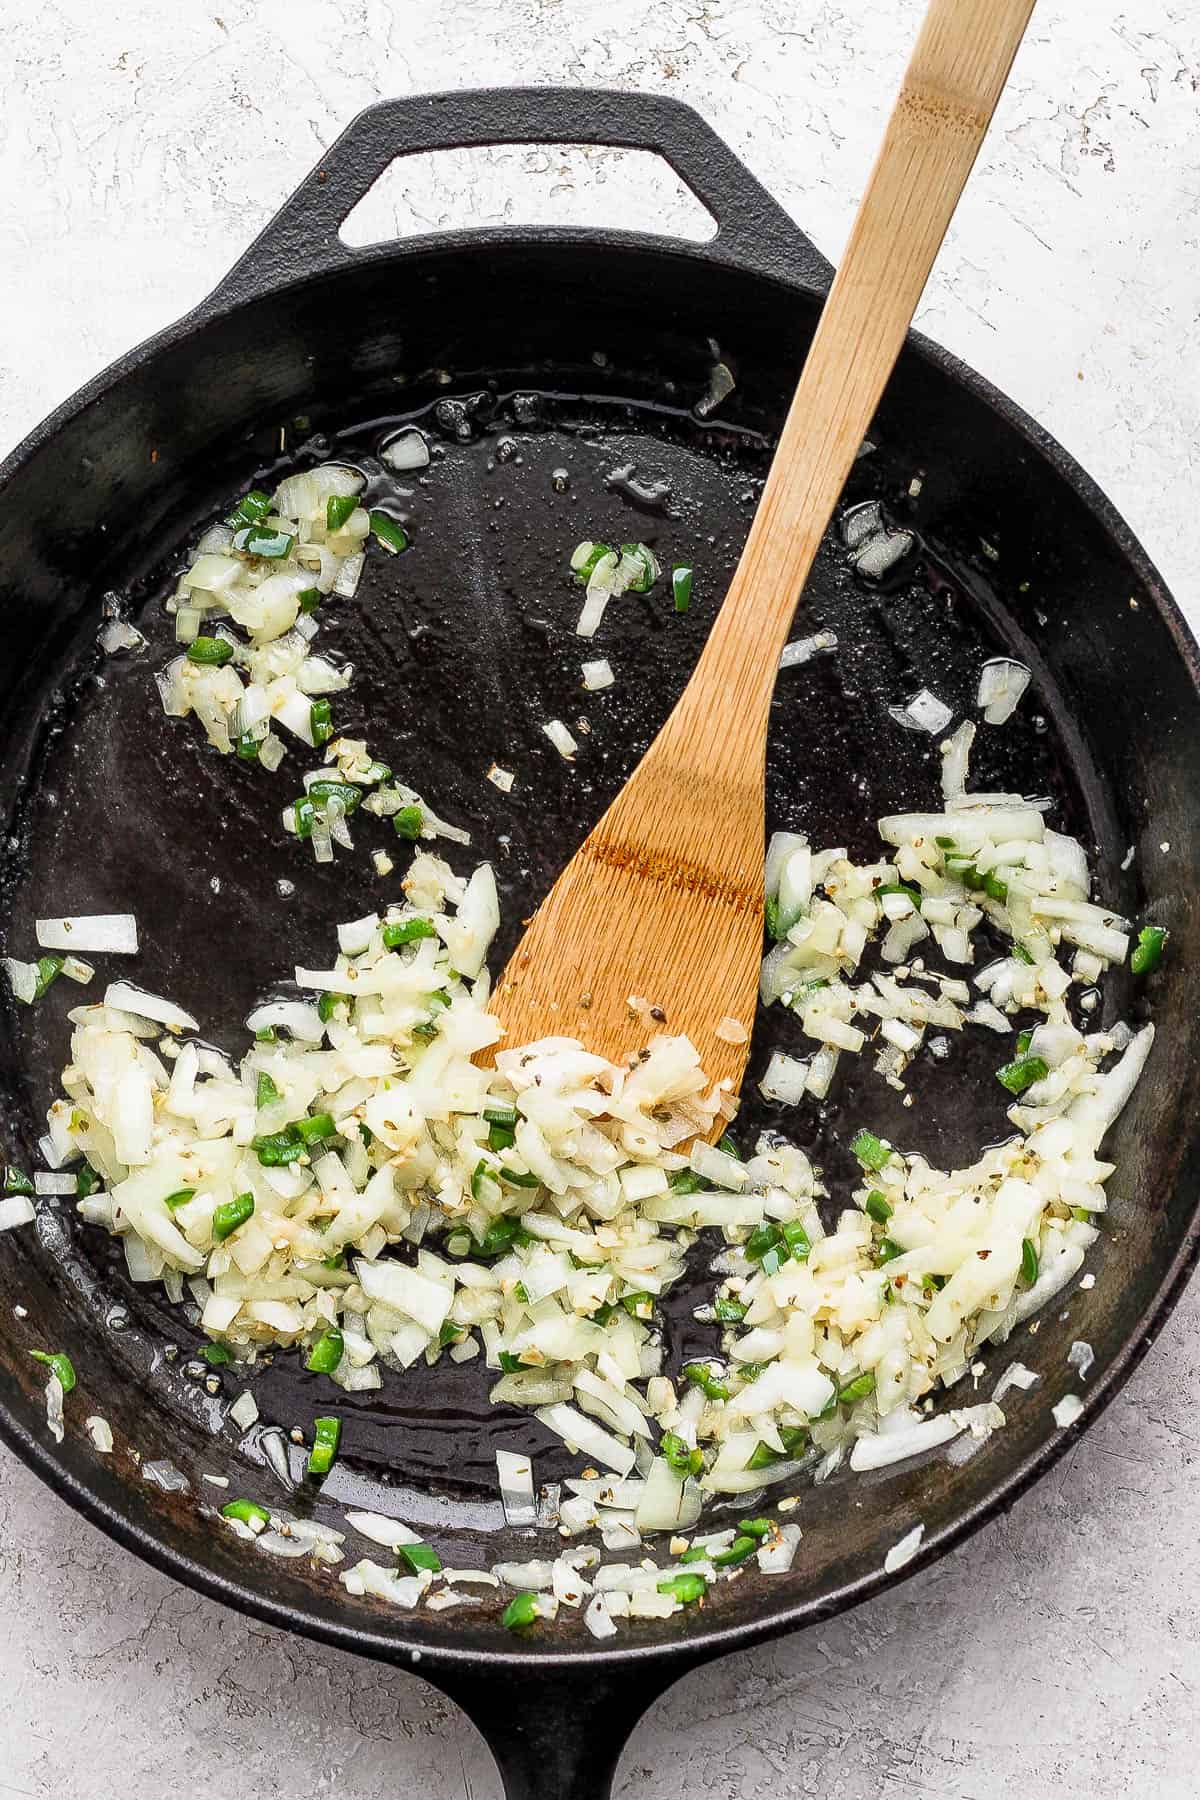 Onion, jalapeno, and garlic being sauteed in a skillet.